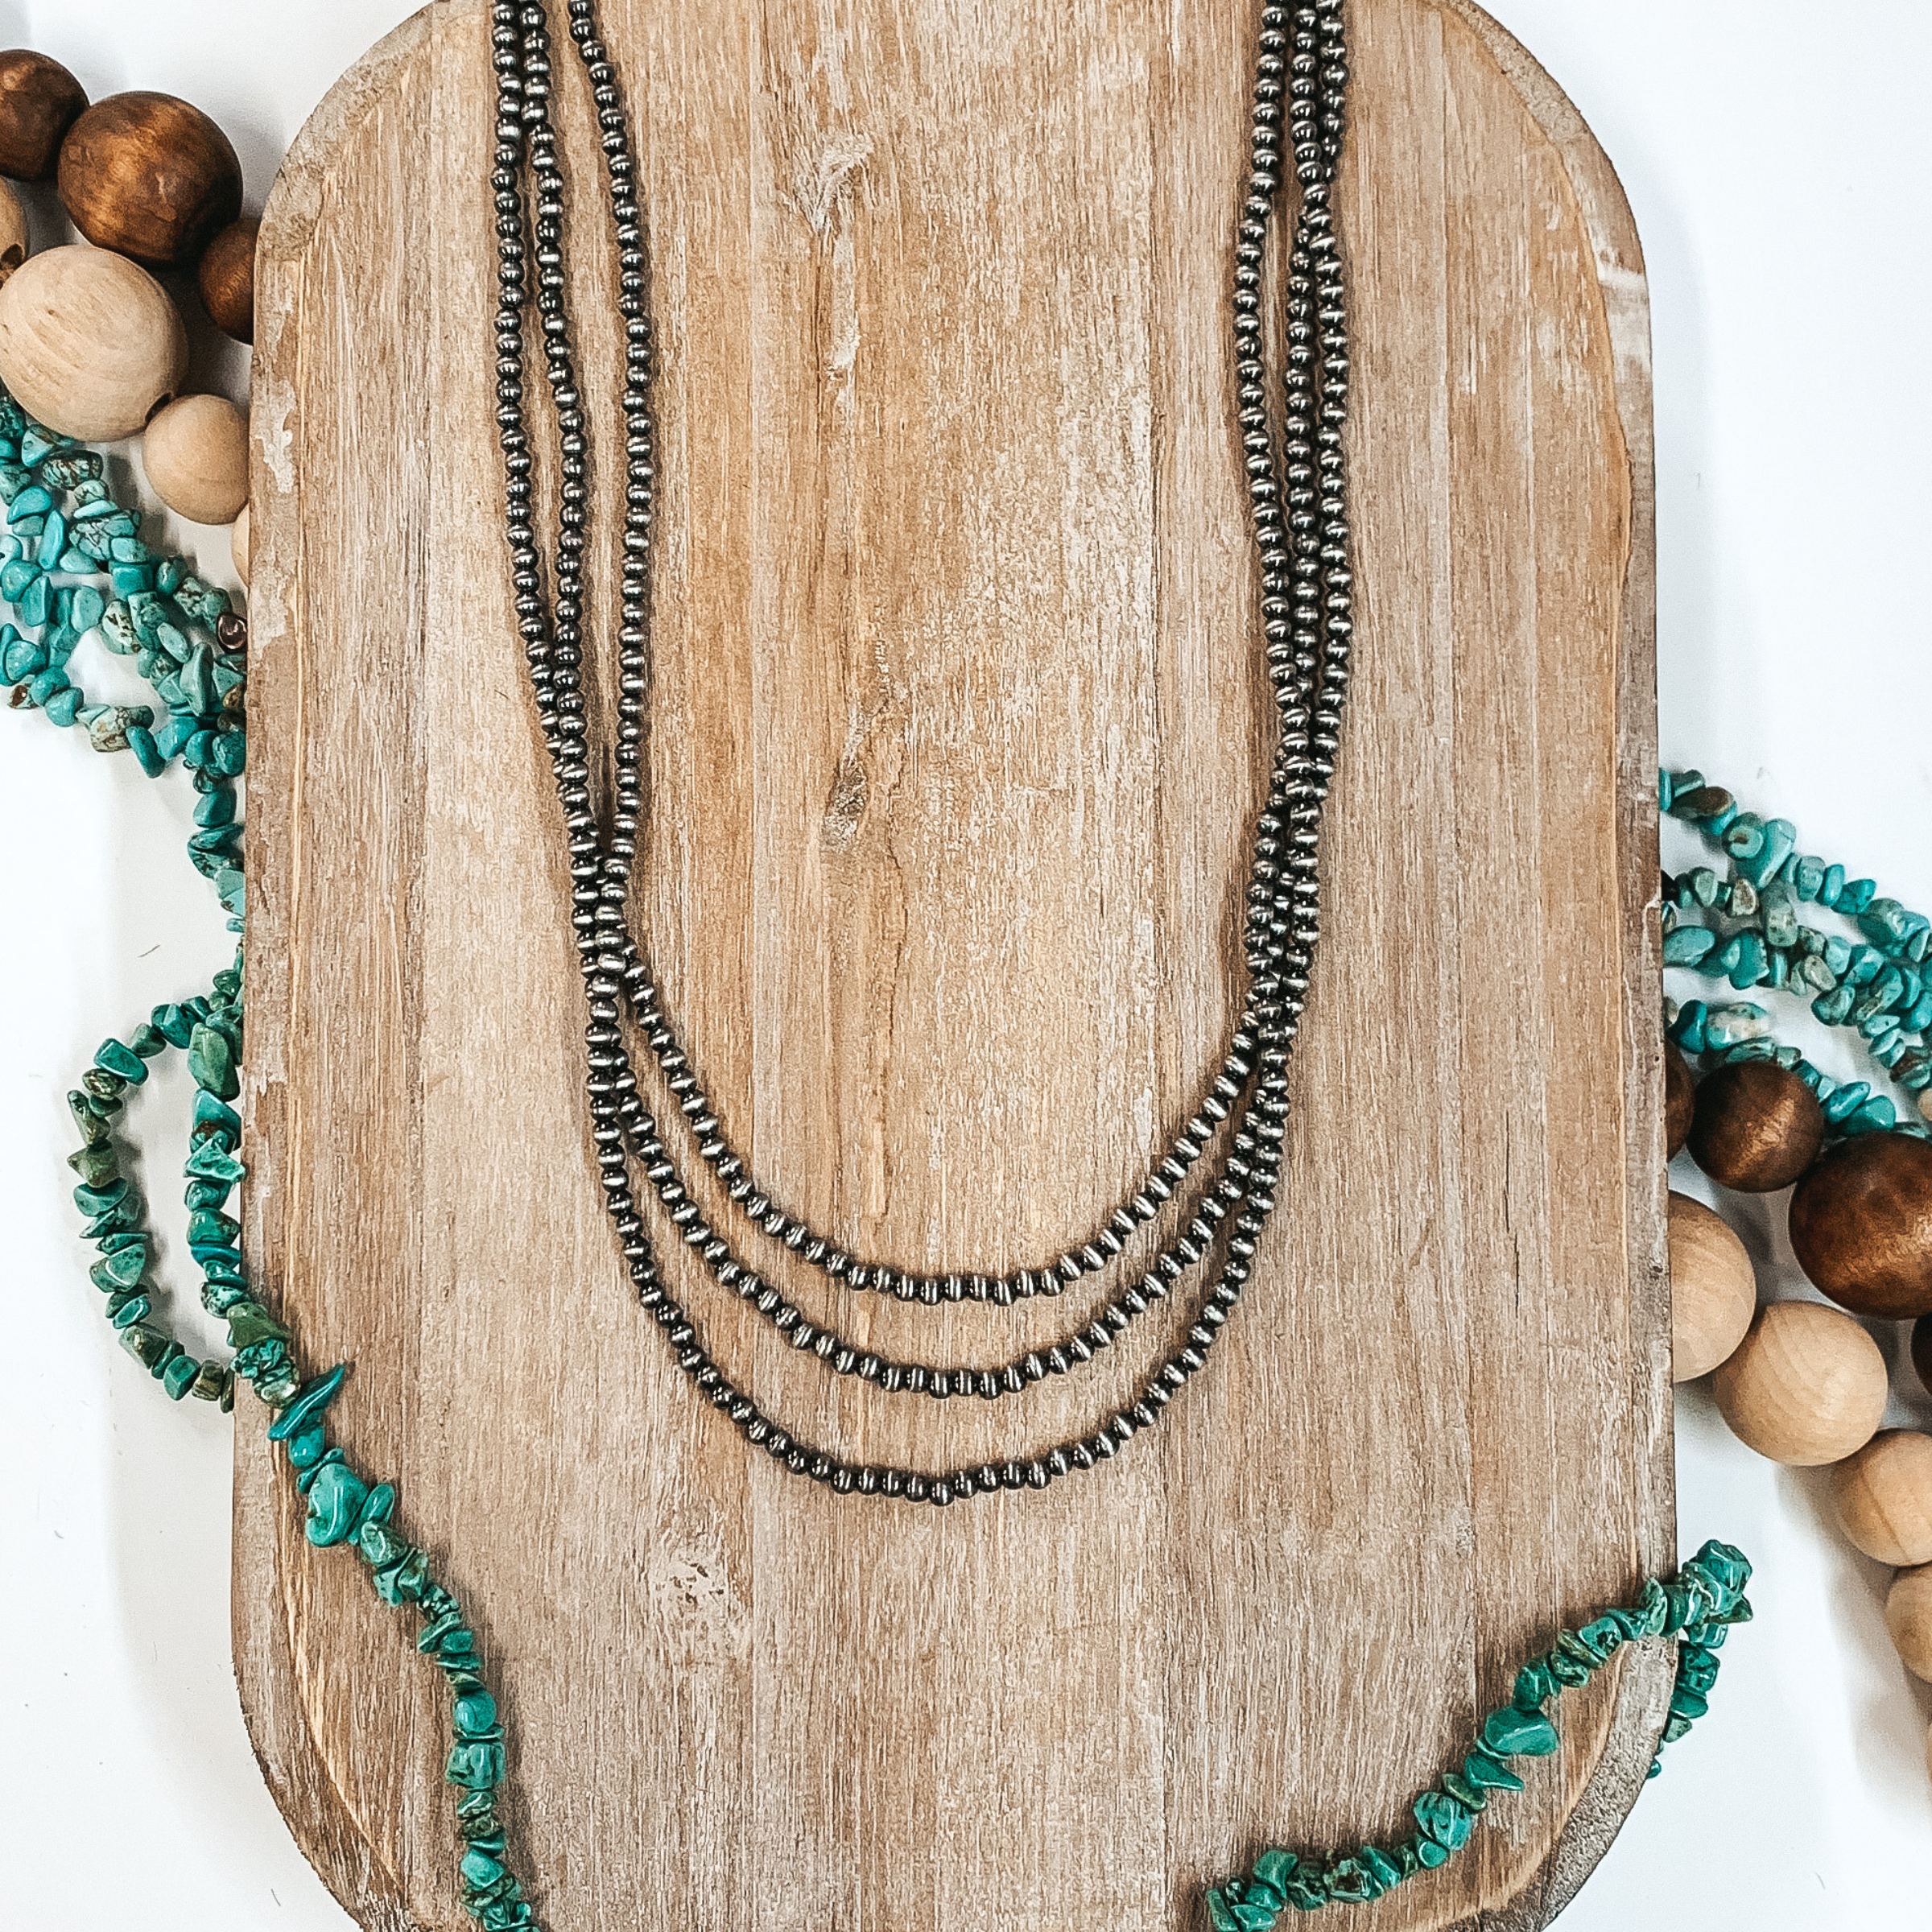 Three Strands of Long Faux Navajo Pearls in Silver Tone - Giddy Up Glamour Boutique